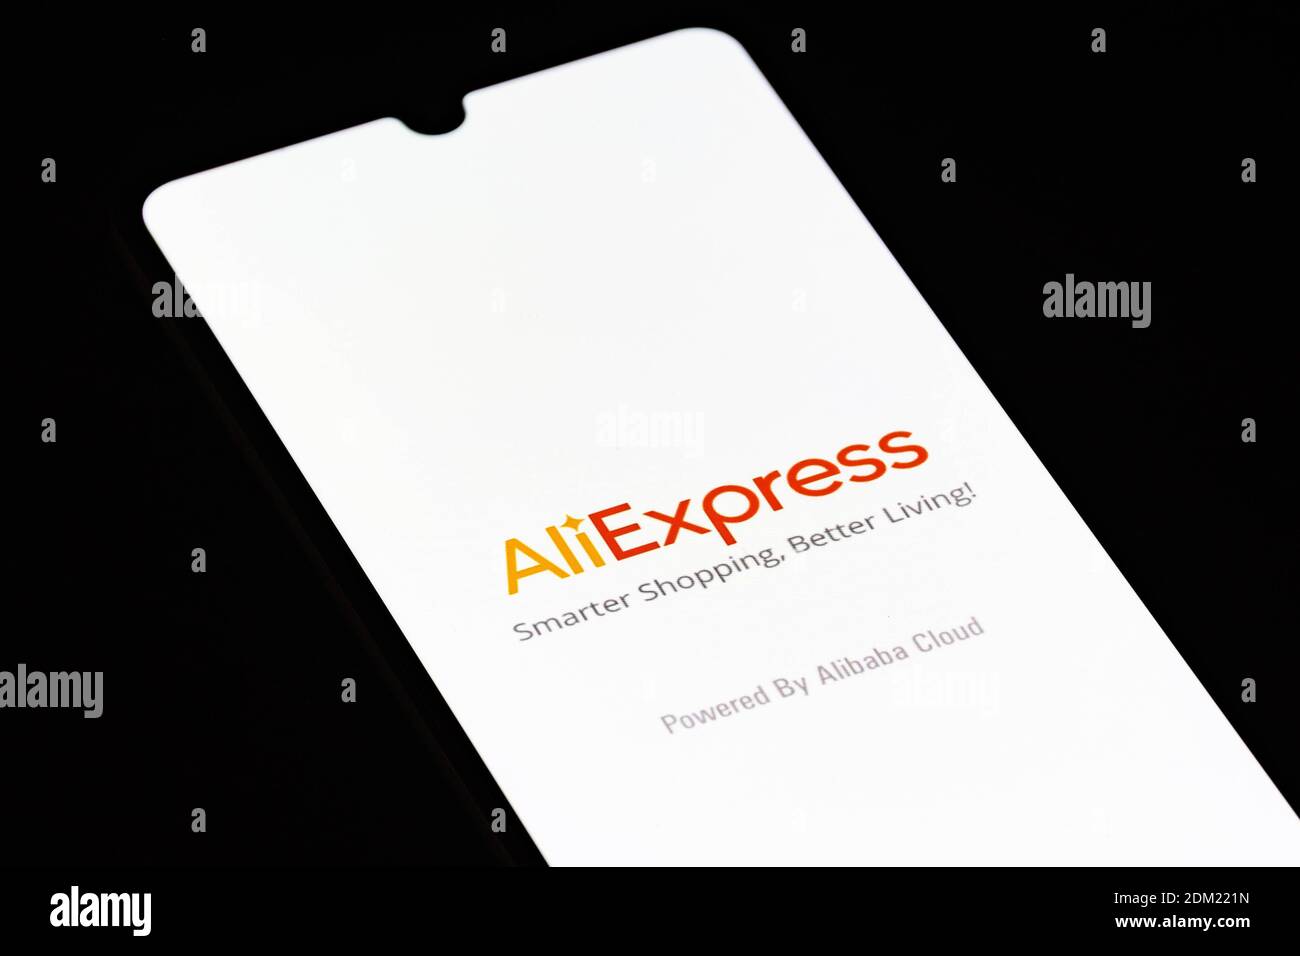 AliExpress app on the smartphone, shopping on line, online retail service based in China owned by the Alibaba Group Stock Photo